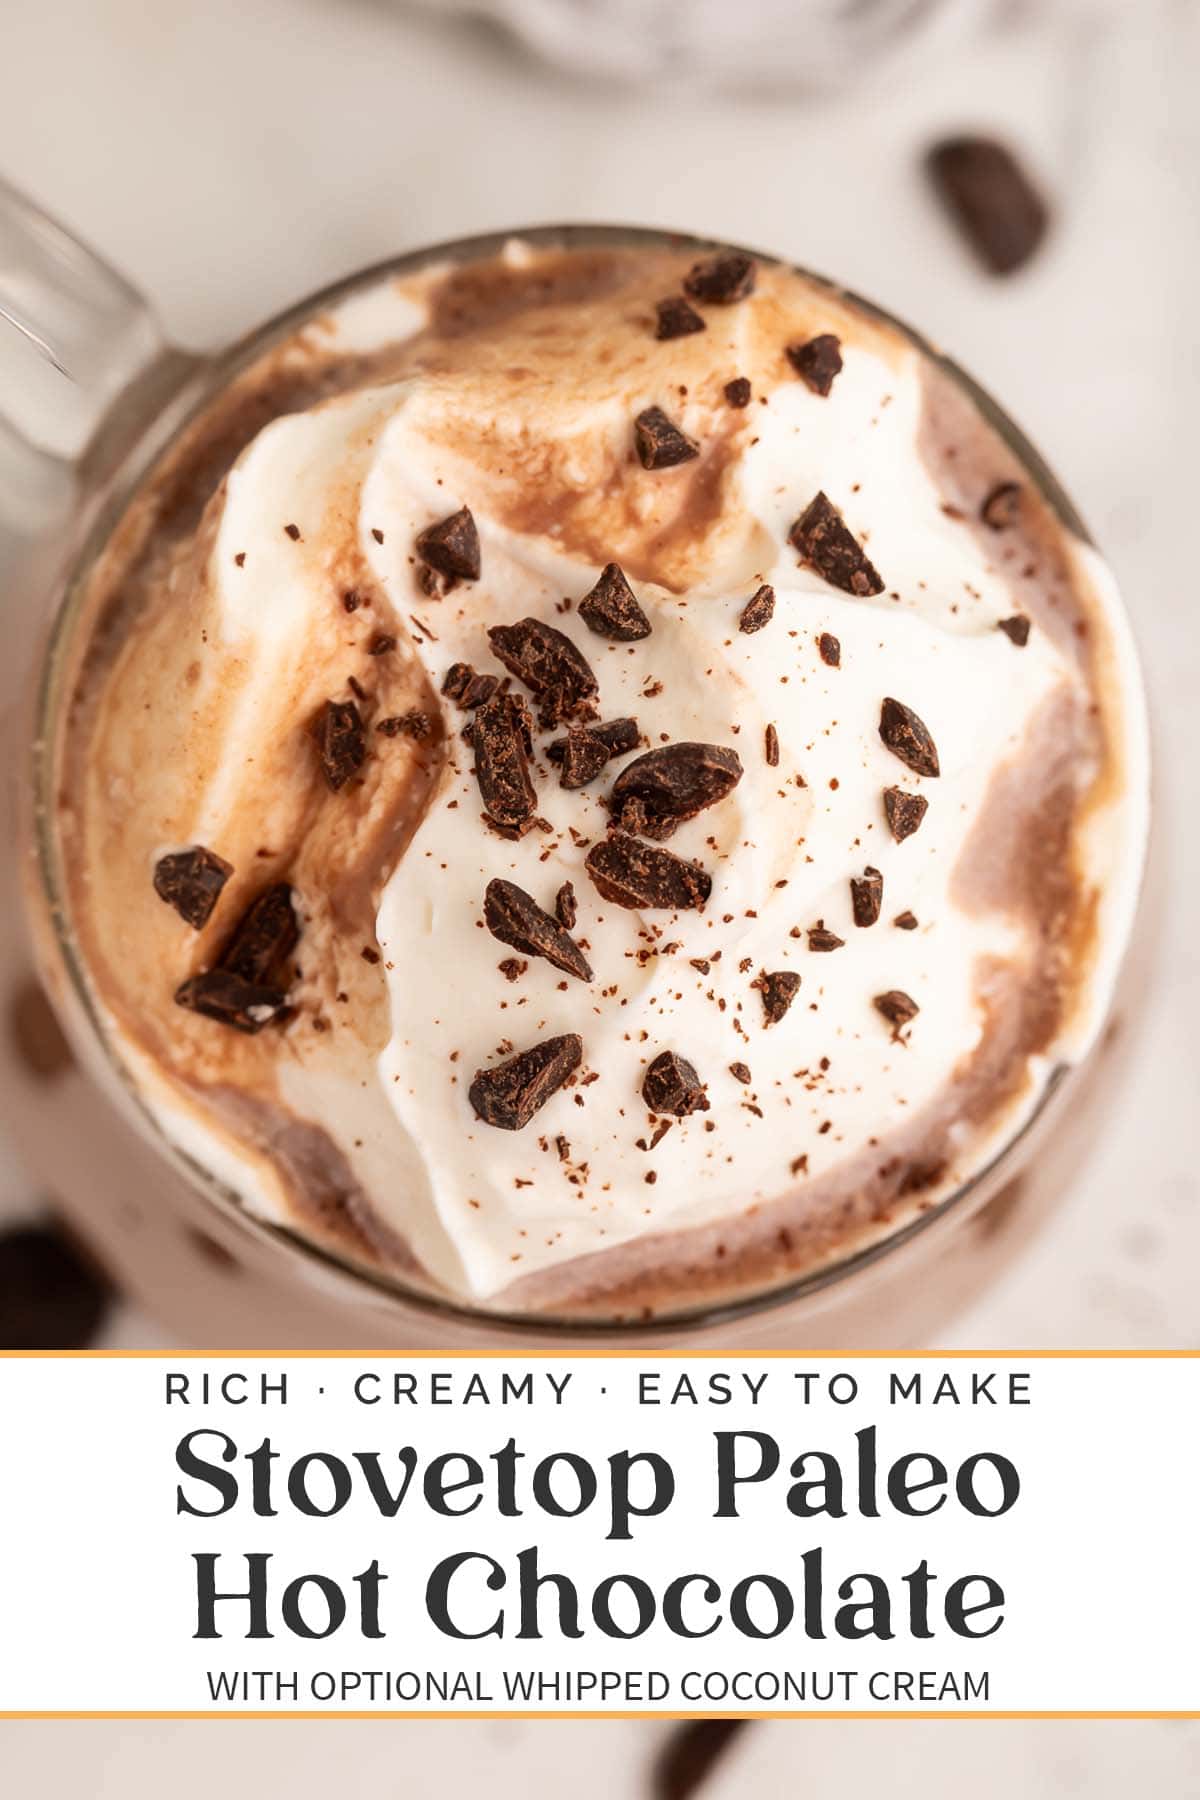 Pin graphic for paleo hot chocolate.